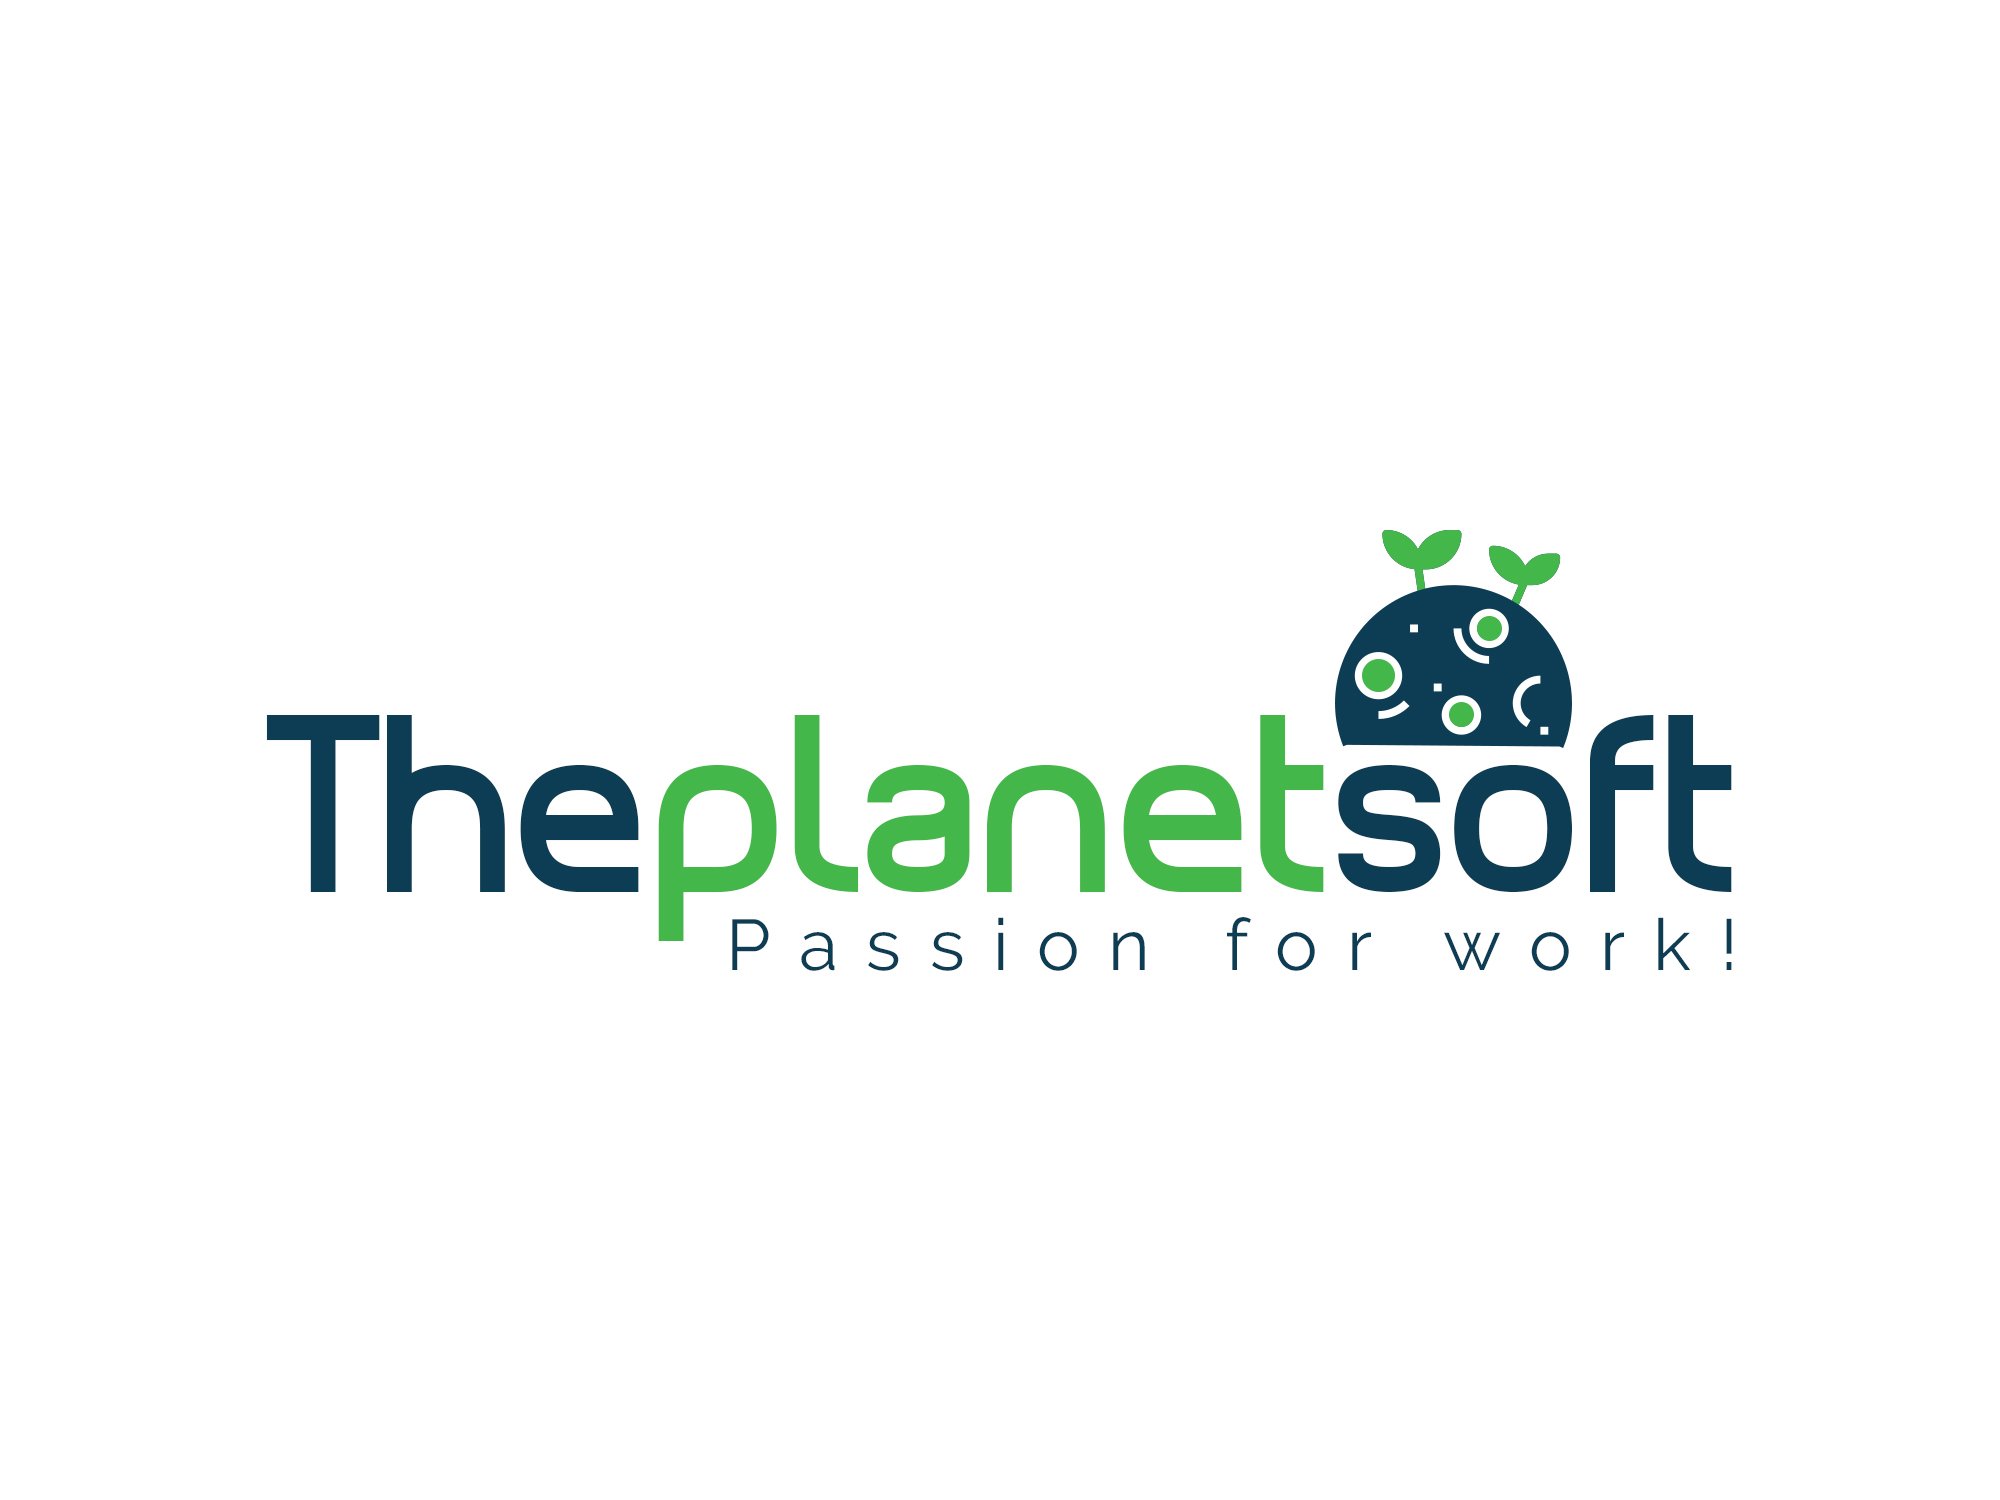 Theplanetsoft offers website design and development, Mobile app, CMS and eCommerce Development all over the world.